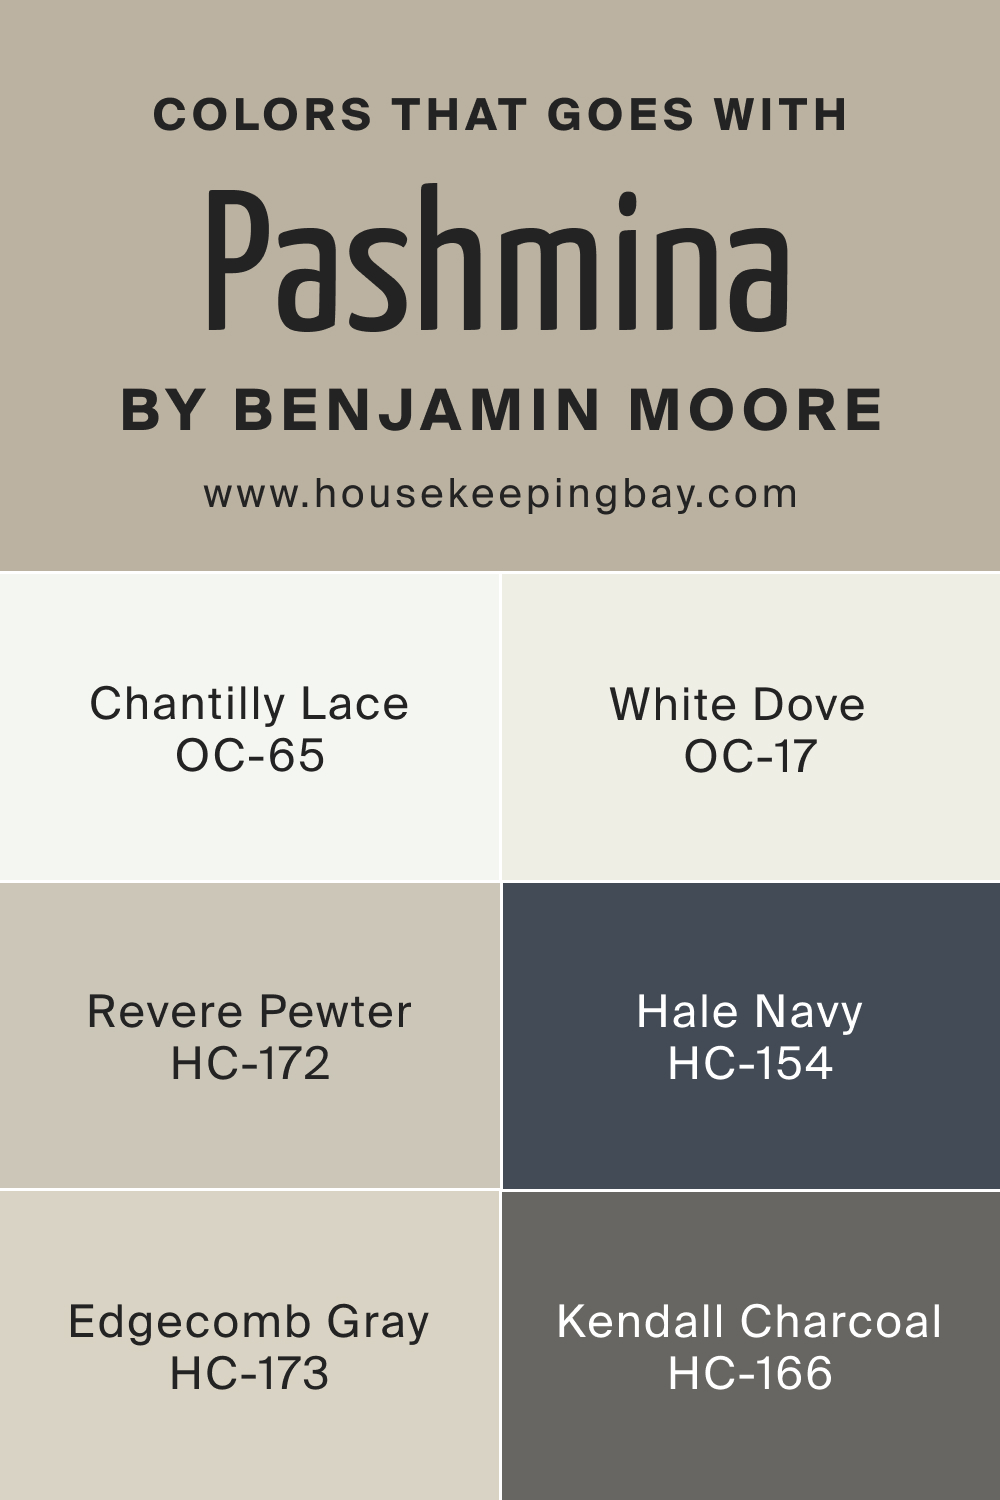 Colors That Go With the Pashmina Paint by Benjamin Moore